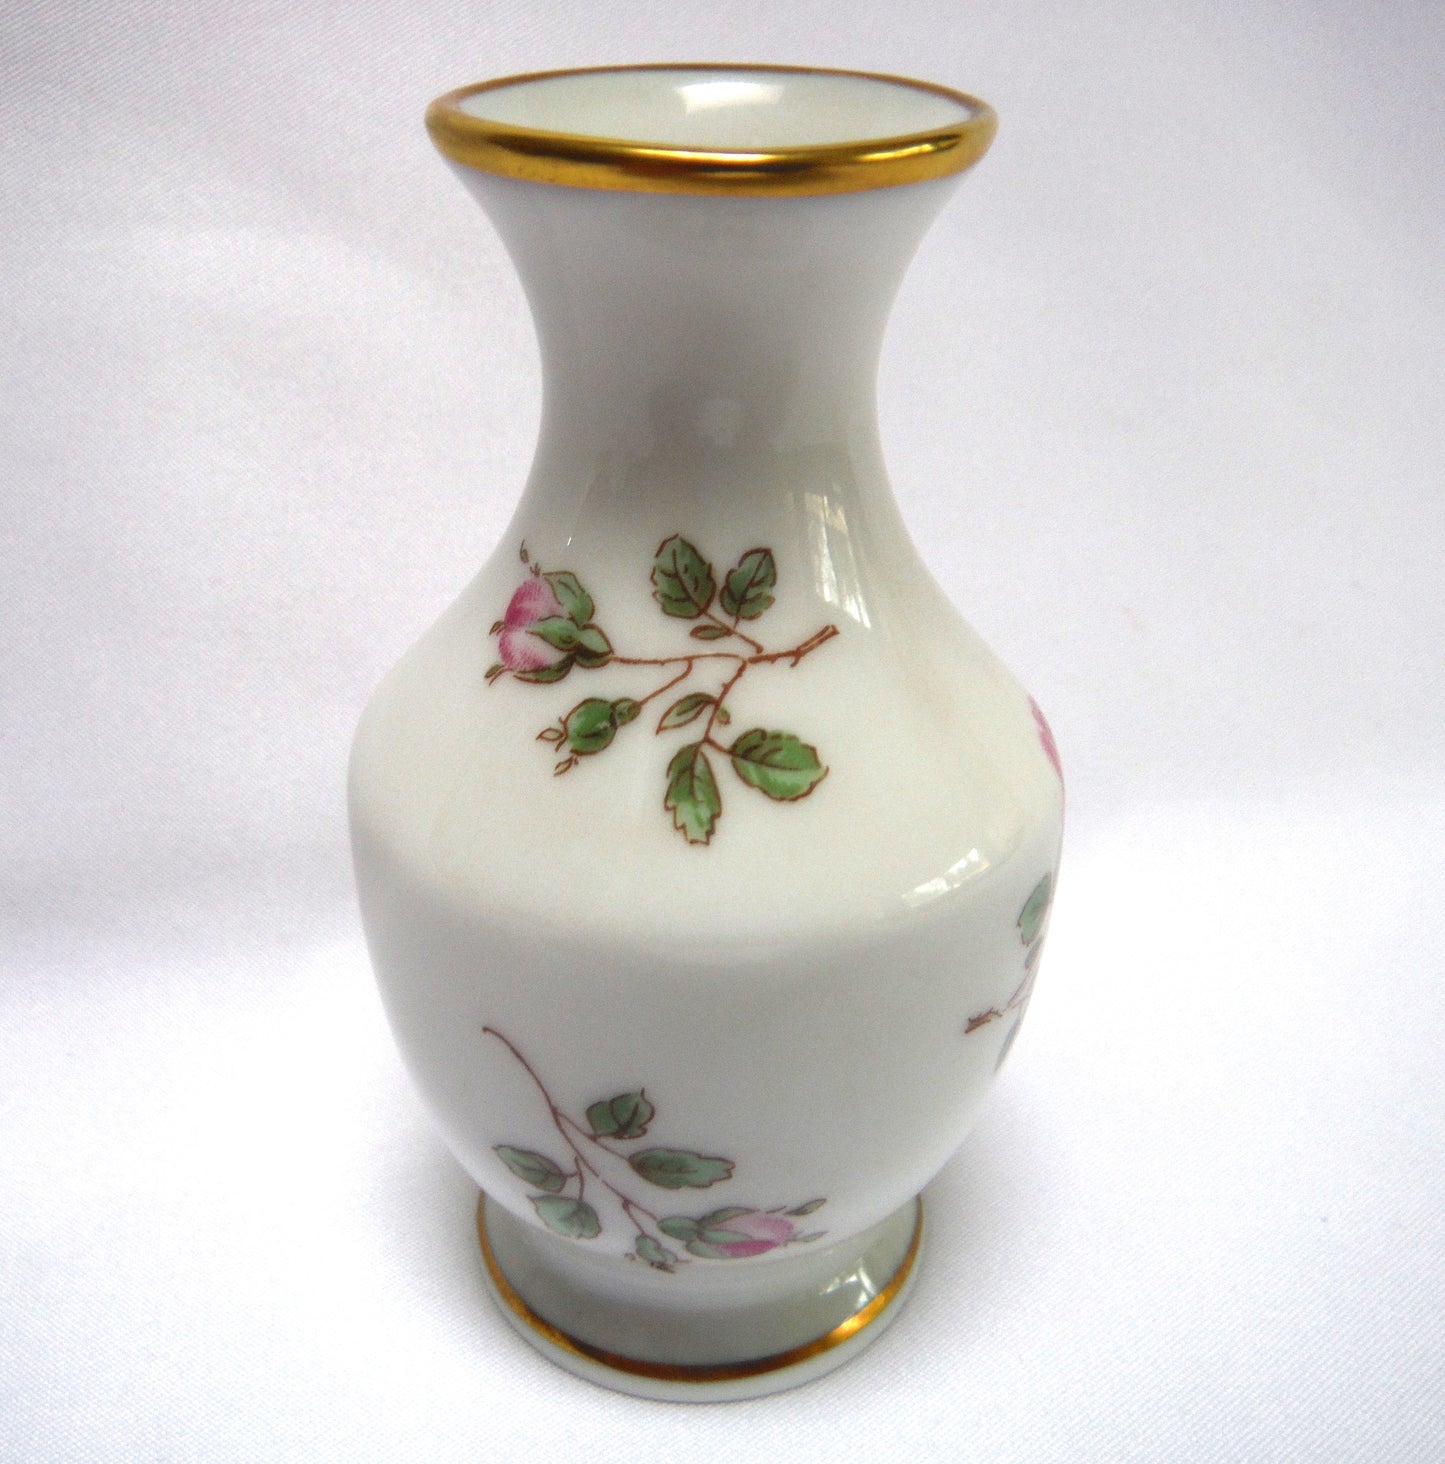 Vintage Miniature Vase, in Delicate Pink Country Roses by RICHARD GENORI of ITALY